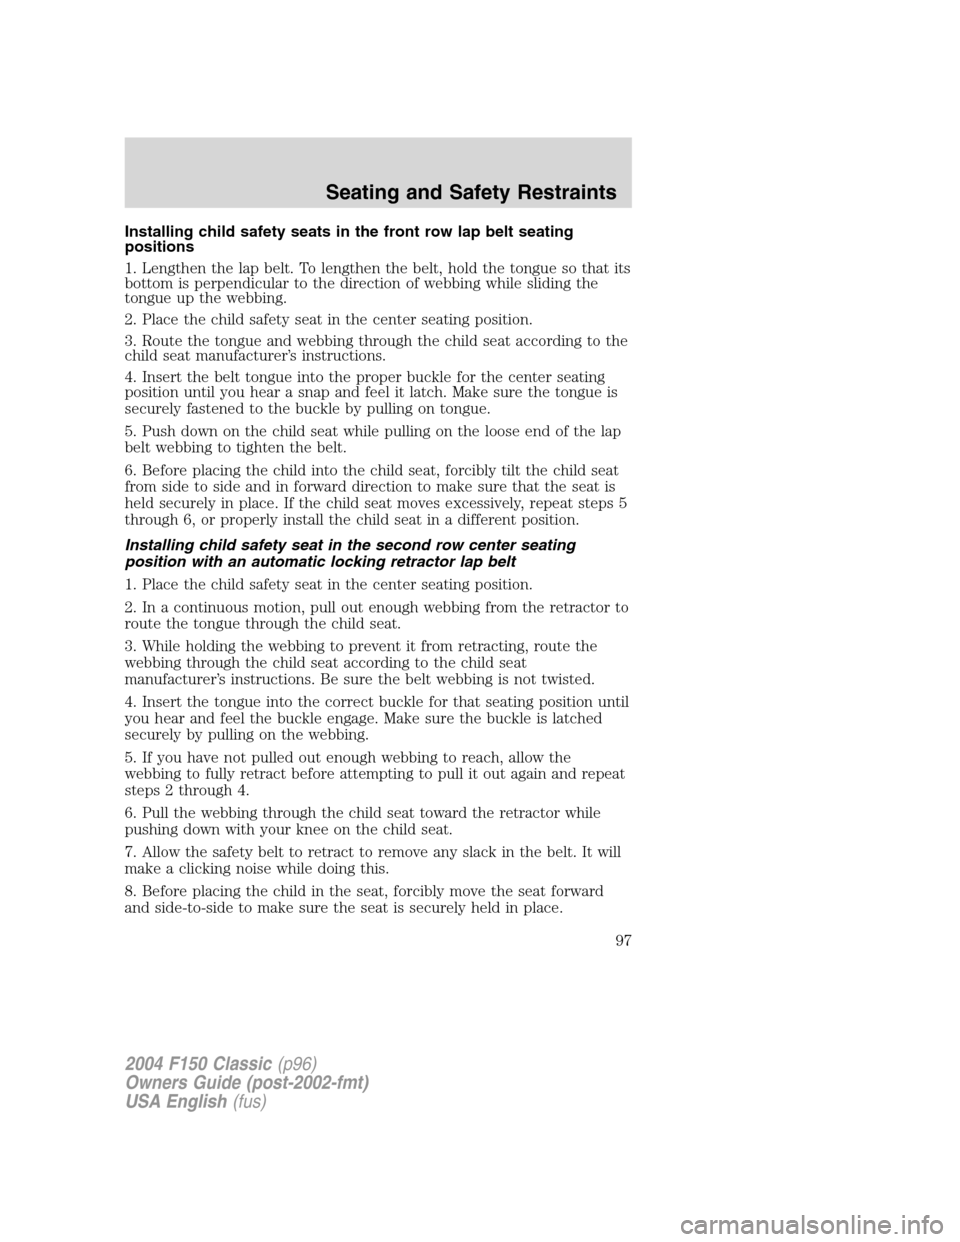 FORD F150 2004 11.G Herritage Owners Manual Installing child safety seats in the front row lap belt seating
positions
1. Lengthen the lap belt. To lengthen the belt, hold the tongue so that its
bottom is perpendicular to the direction of webbin